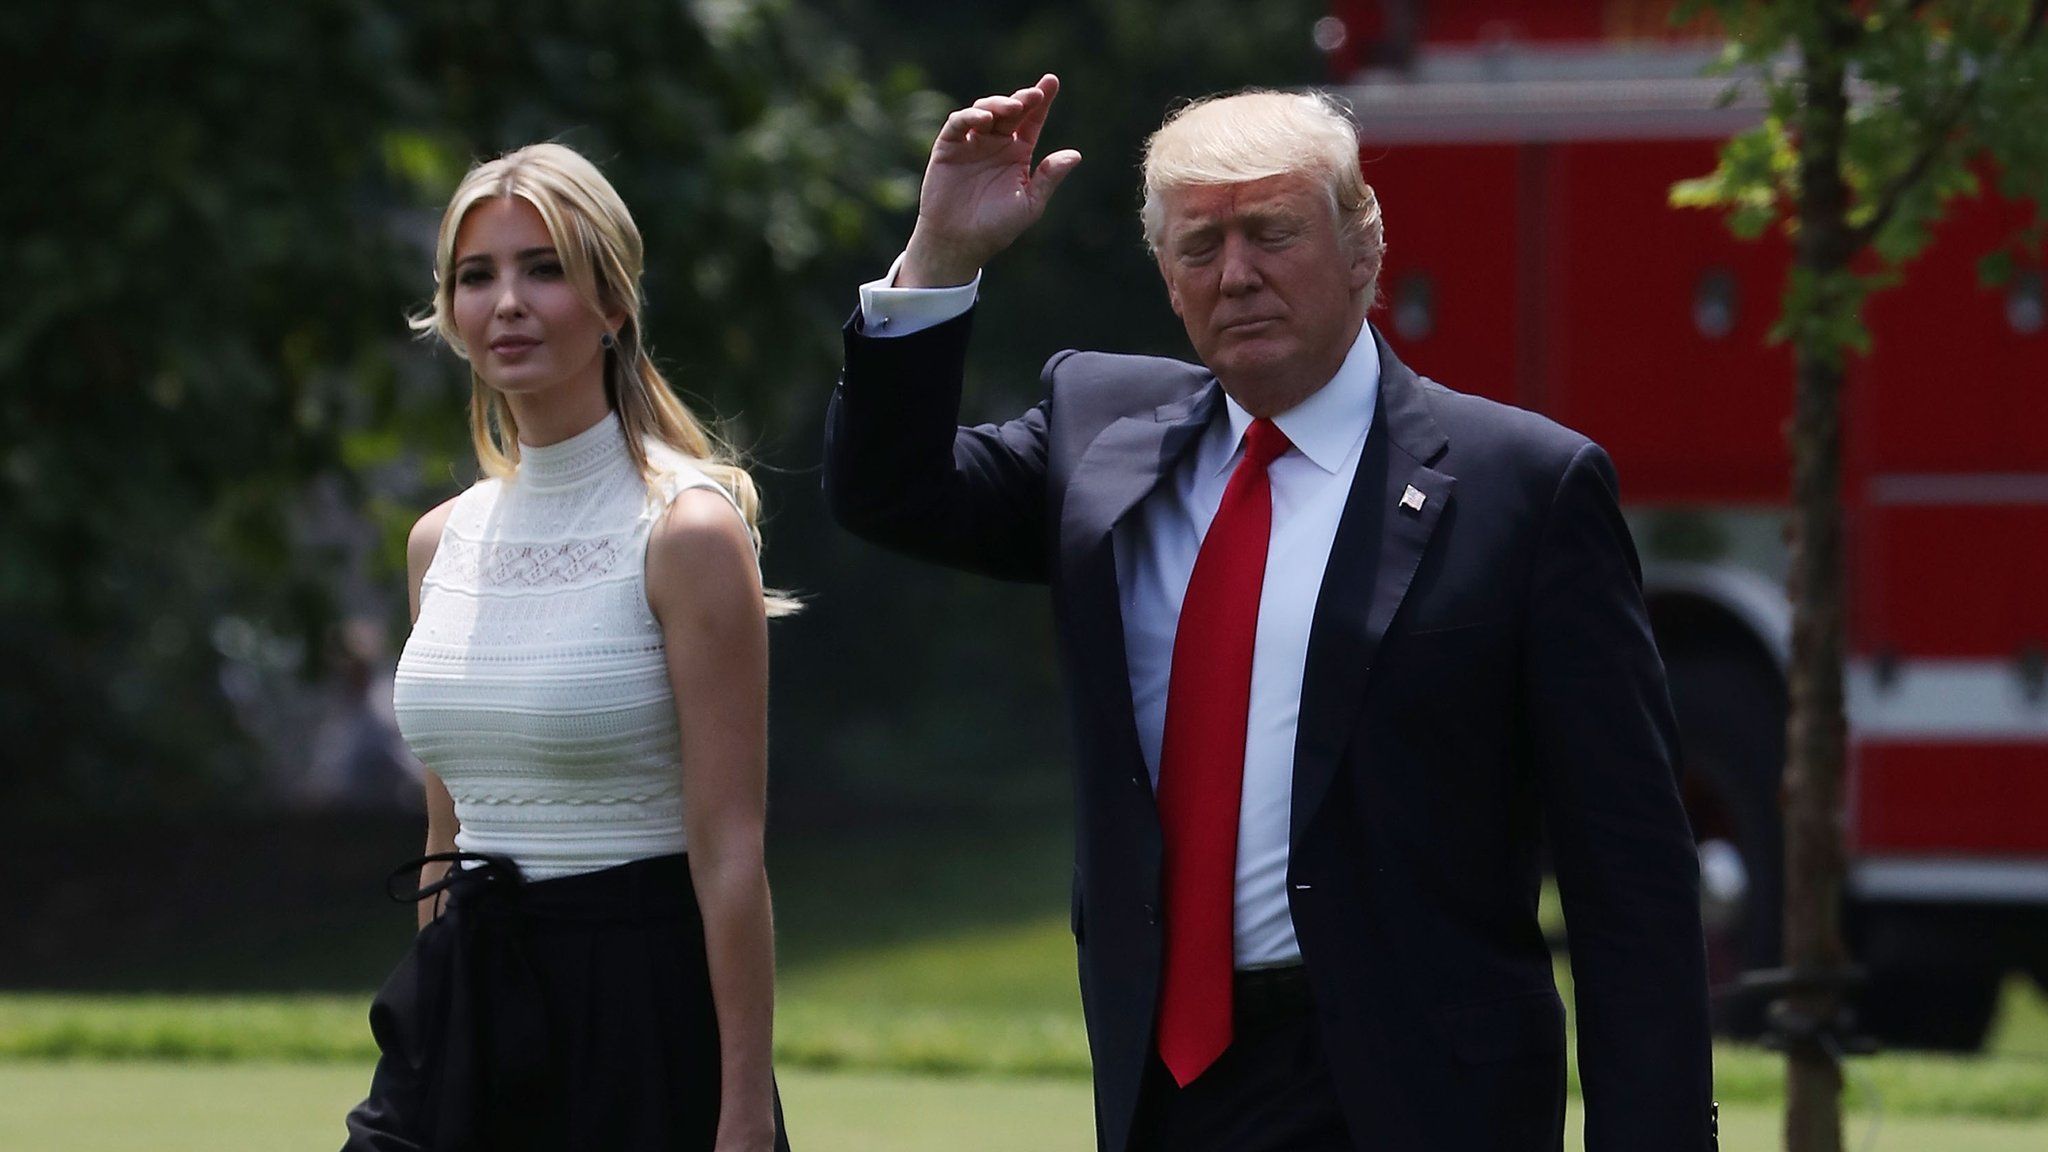 U.S. President Donald Trump and daughter Ivanka Trump walk toward Marine One before departing from the White House on June 13, 2017 in Washington, DC.